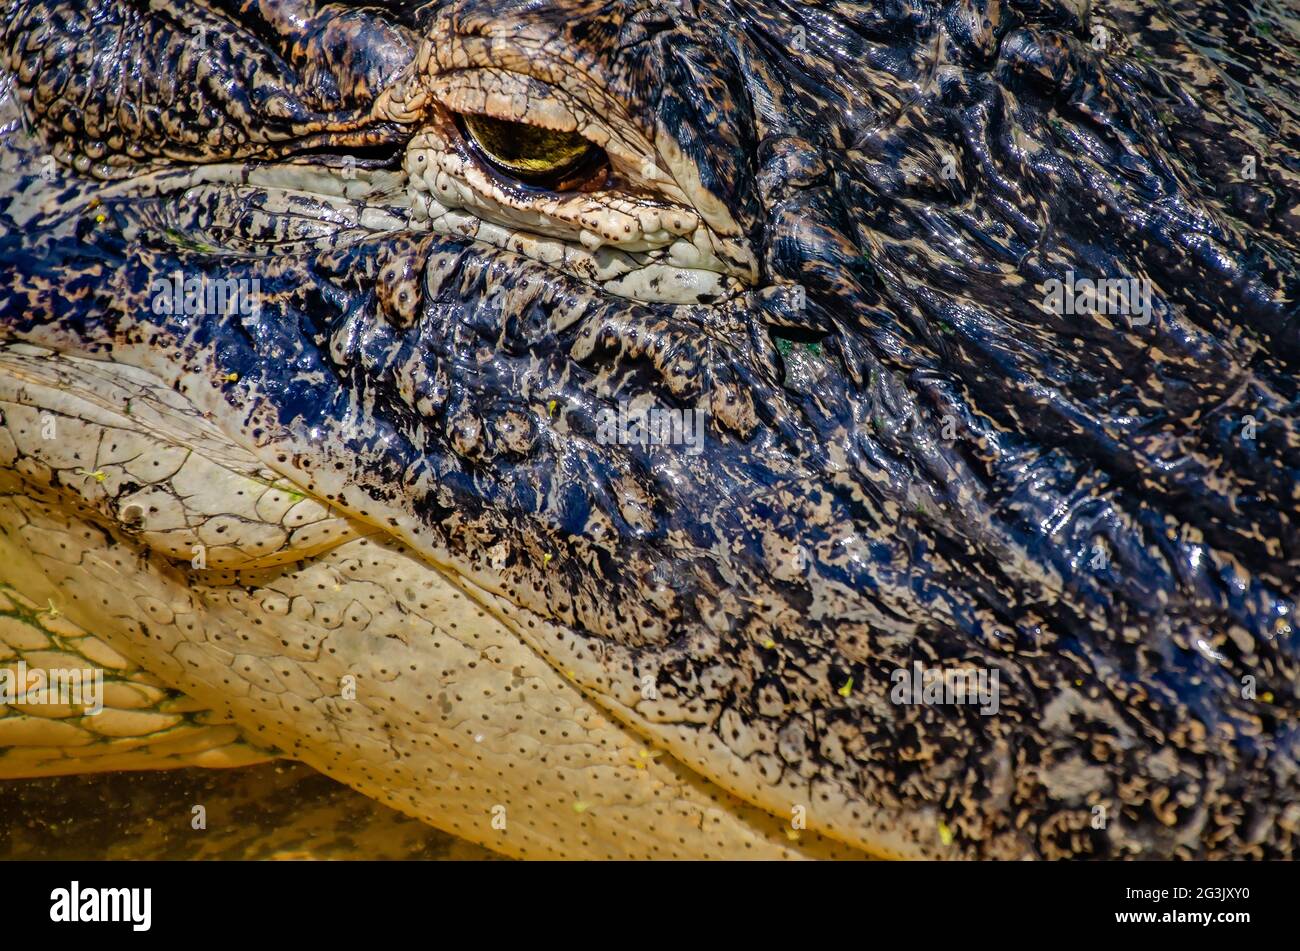 A young female American alligator rests in a pen at Gulf Coast Gator Ranch and Tours, June 12, 2021, in Moss Point, Mississippi. Stock Photo